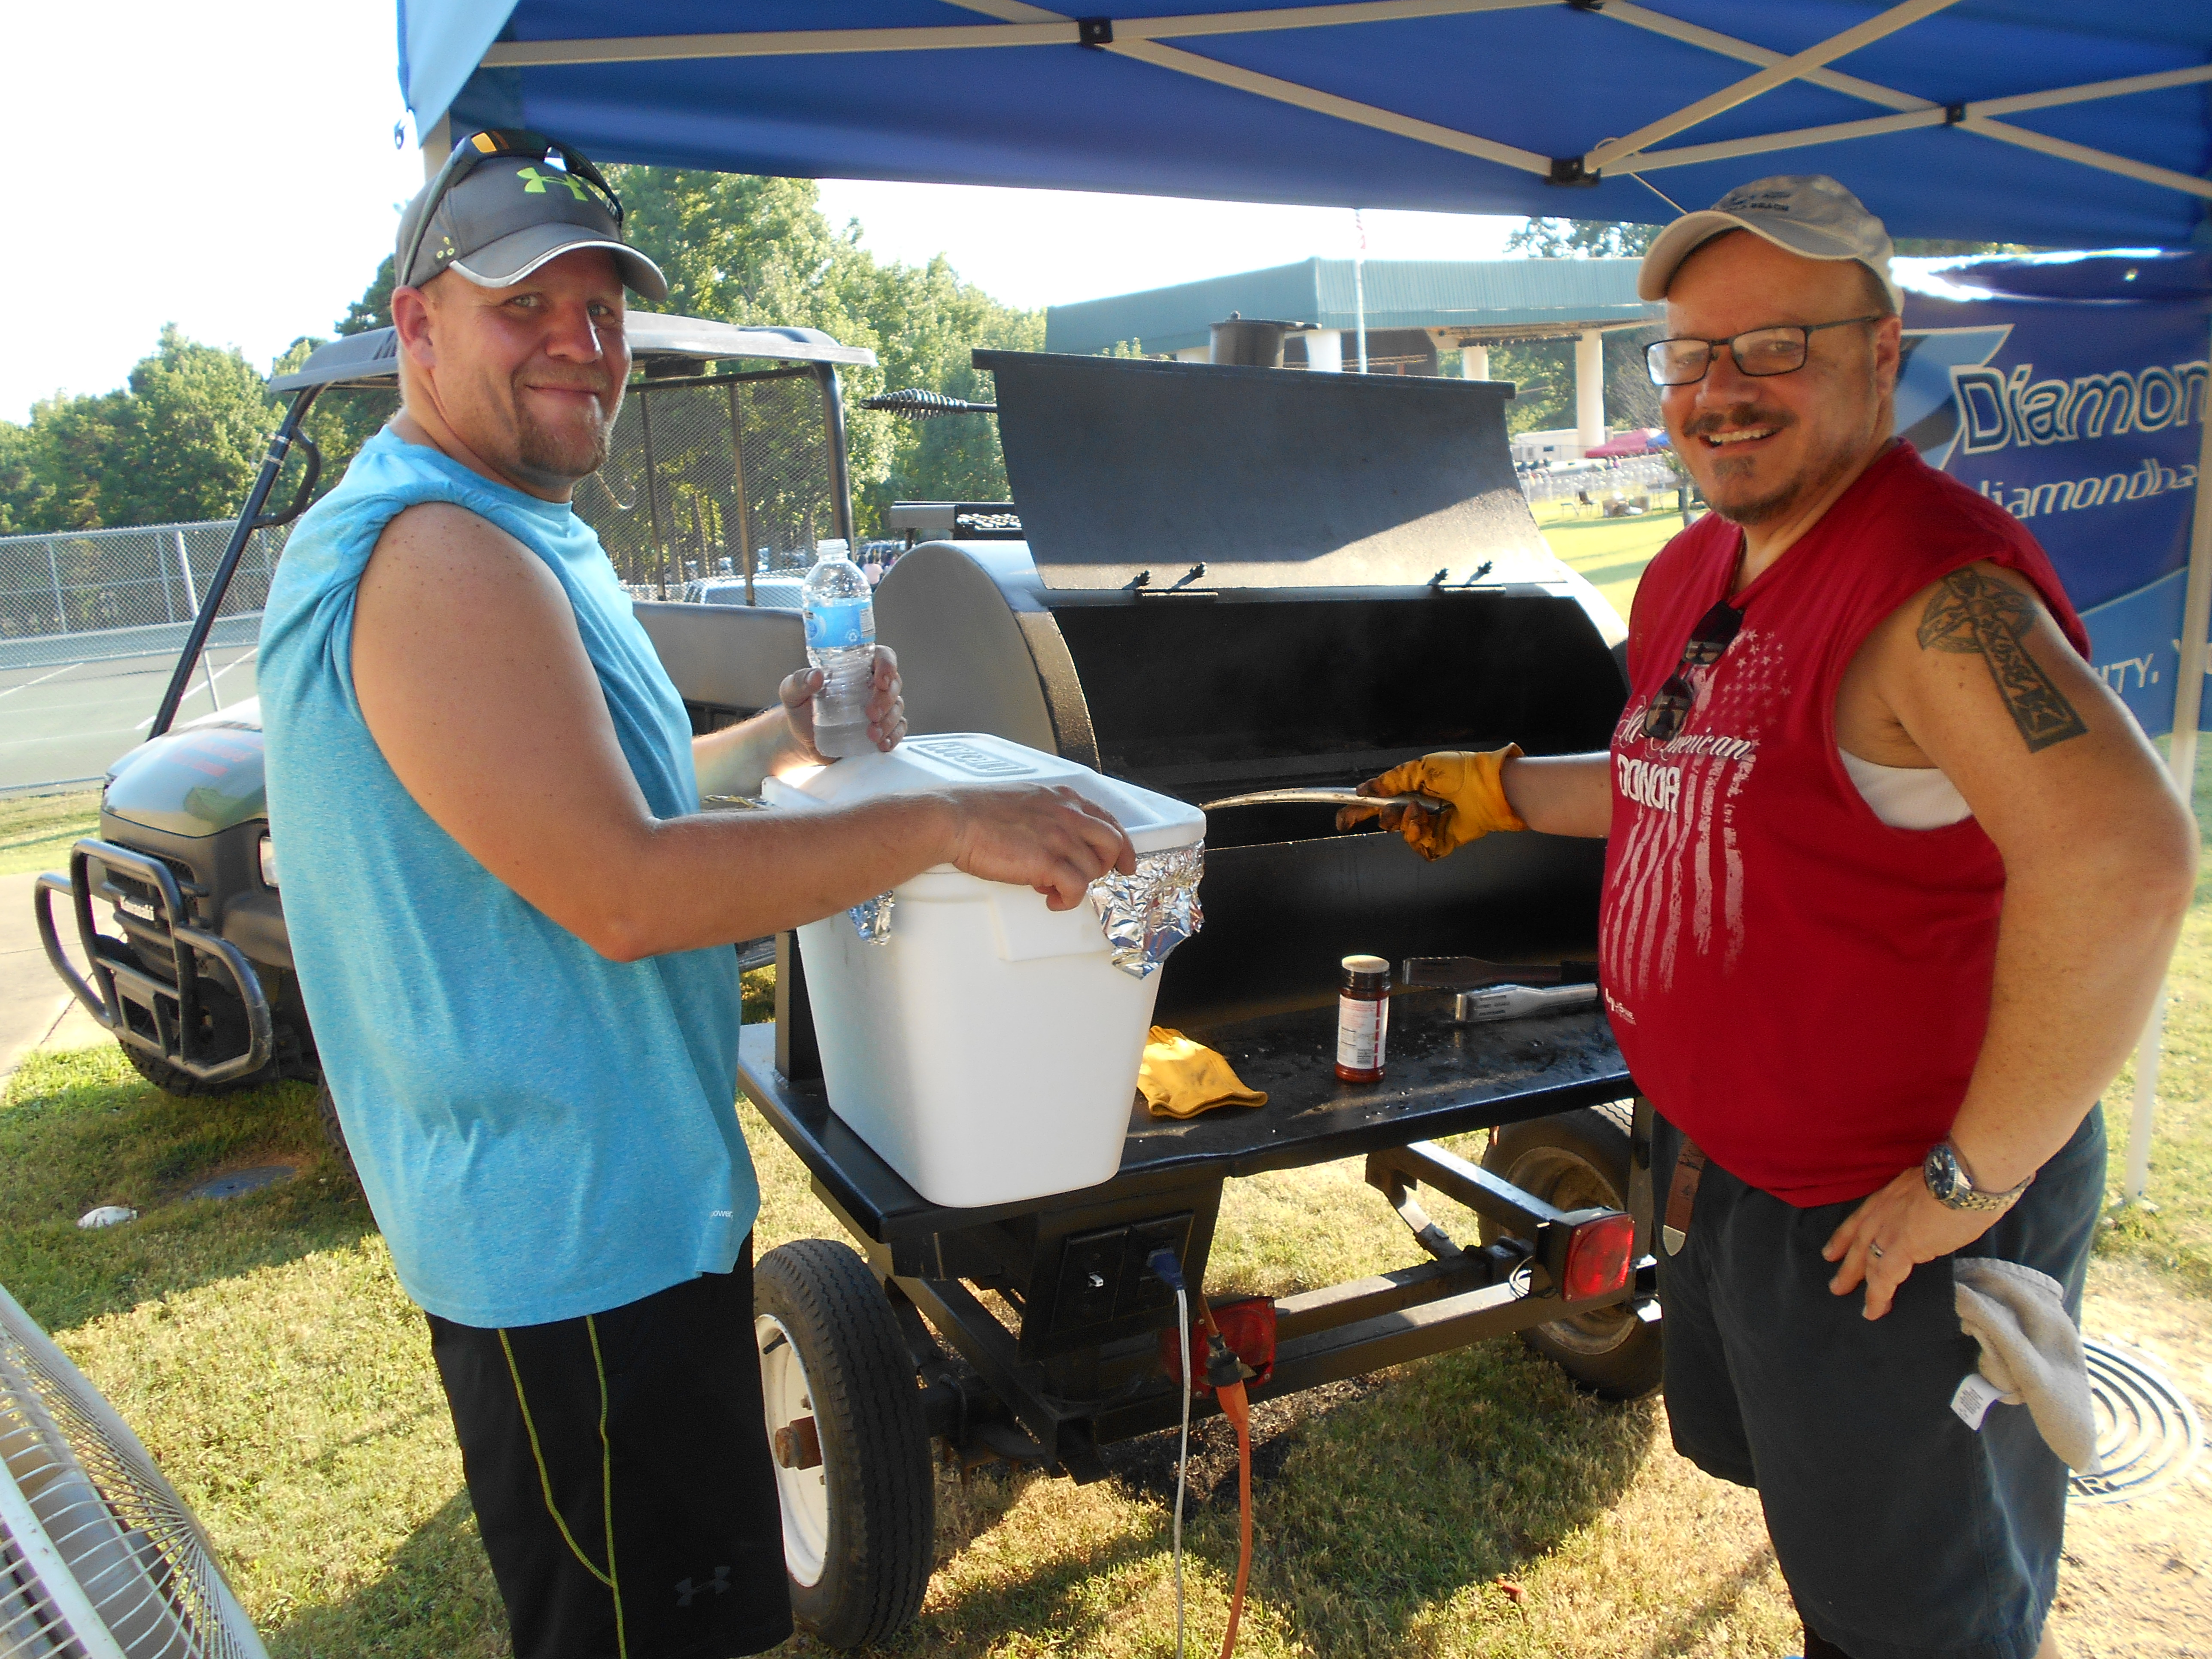 Chamber board member Bill Craig, right, gets some help from Drew Moody at the hamburger/hotdog cooking station at the Stand Up for America Gala.